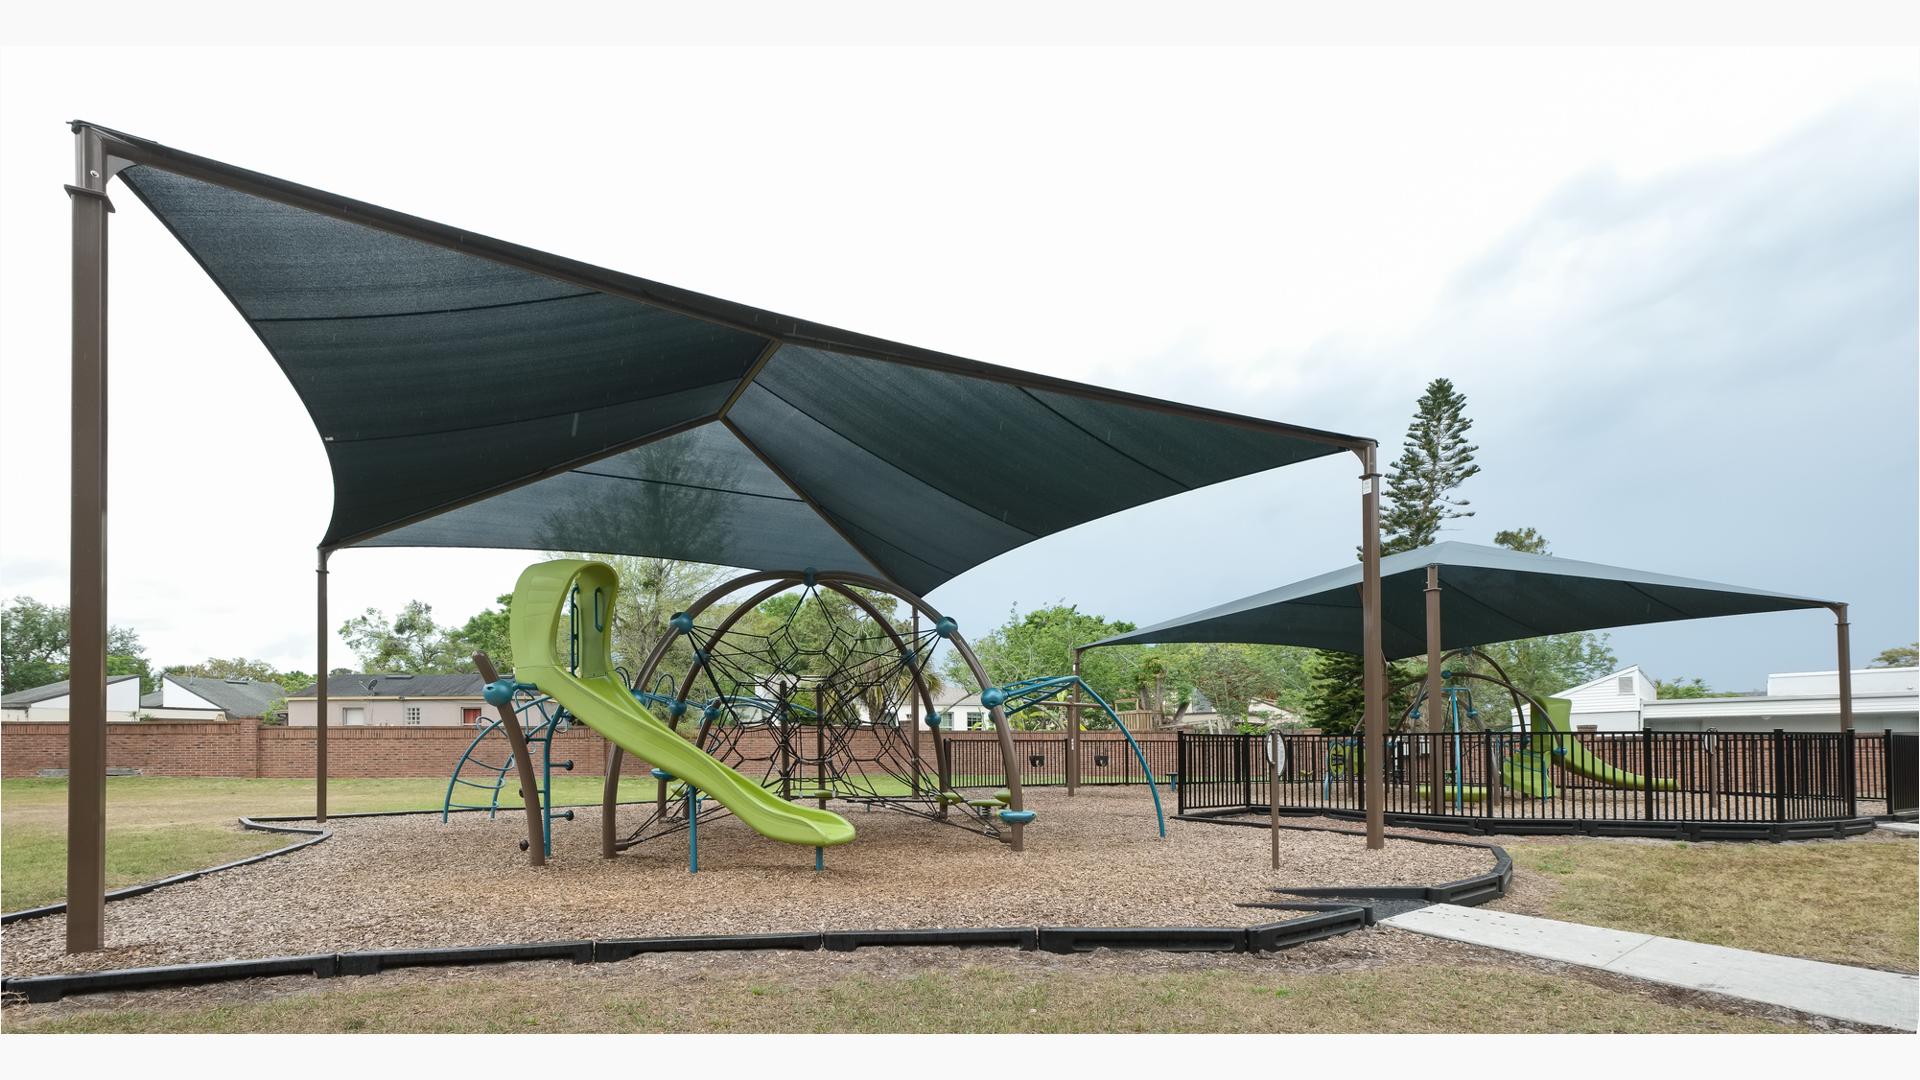 Moss Park, Winter Springs, FL. An Eclipse® Net Plus playground includes a Ring Tangle® Climber, Rush™ Slide, Blender™ Spinner and more.